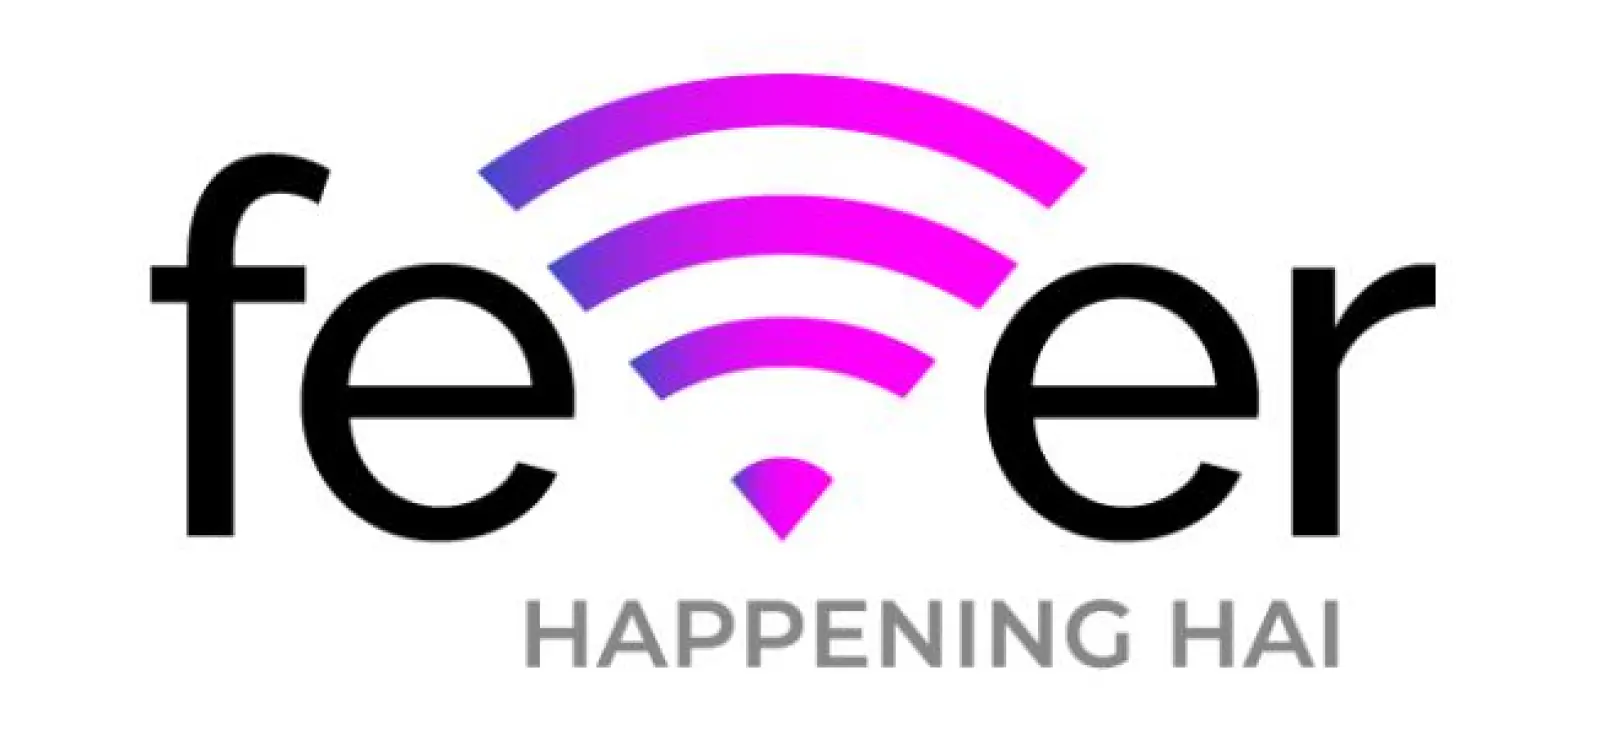 Fever FM Redefines Radio for the Digital Era with a Brand Refresh, Unveils New logo, and Tagline, 'Happening Hai'